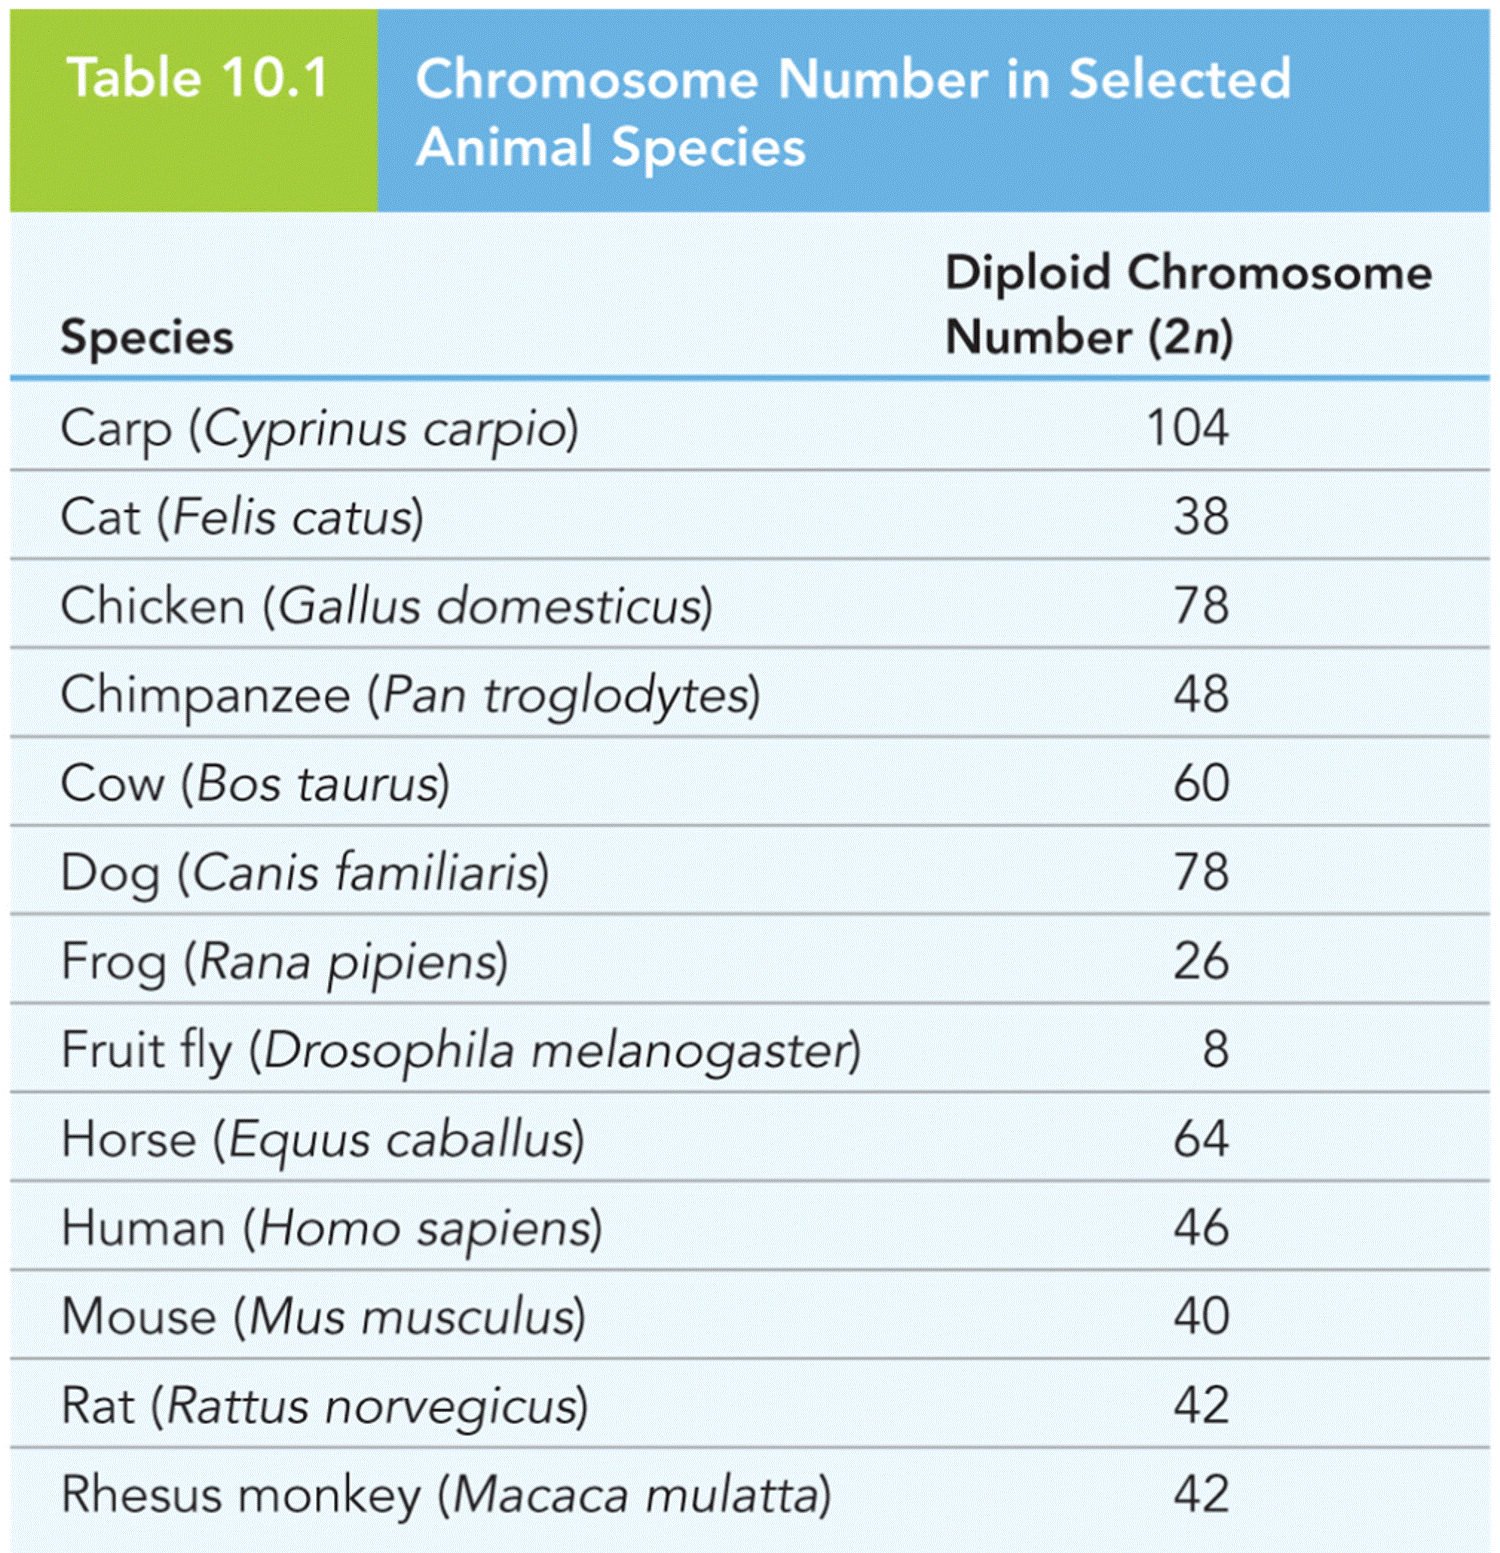 Chromosome Number in Selected Animal Species